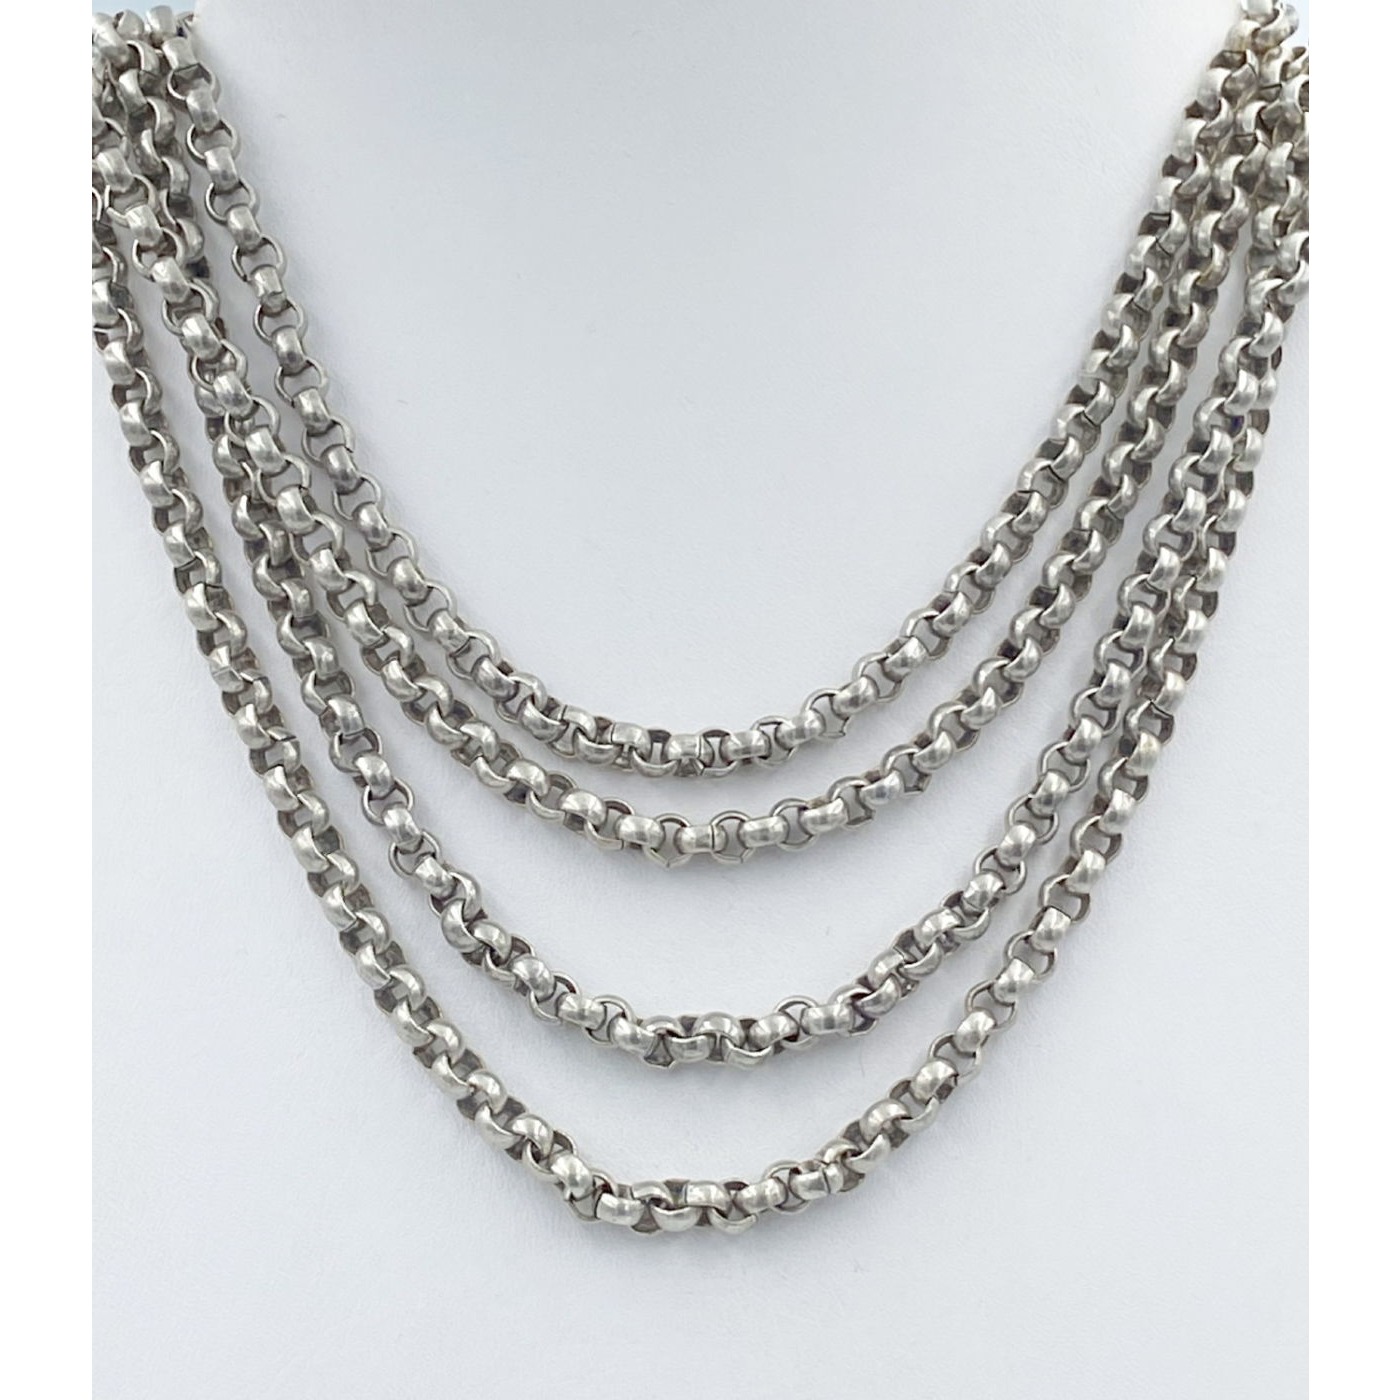 Incredible 64" Long Sterling Silver English Muff Rolo Chain